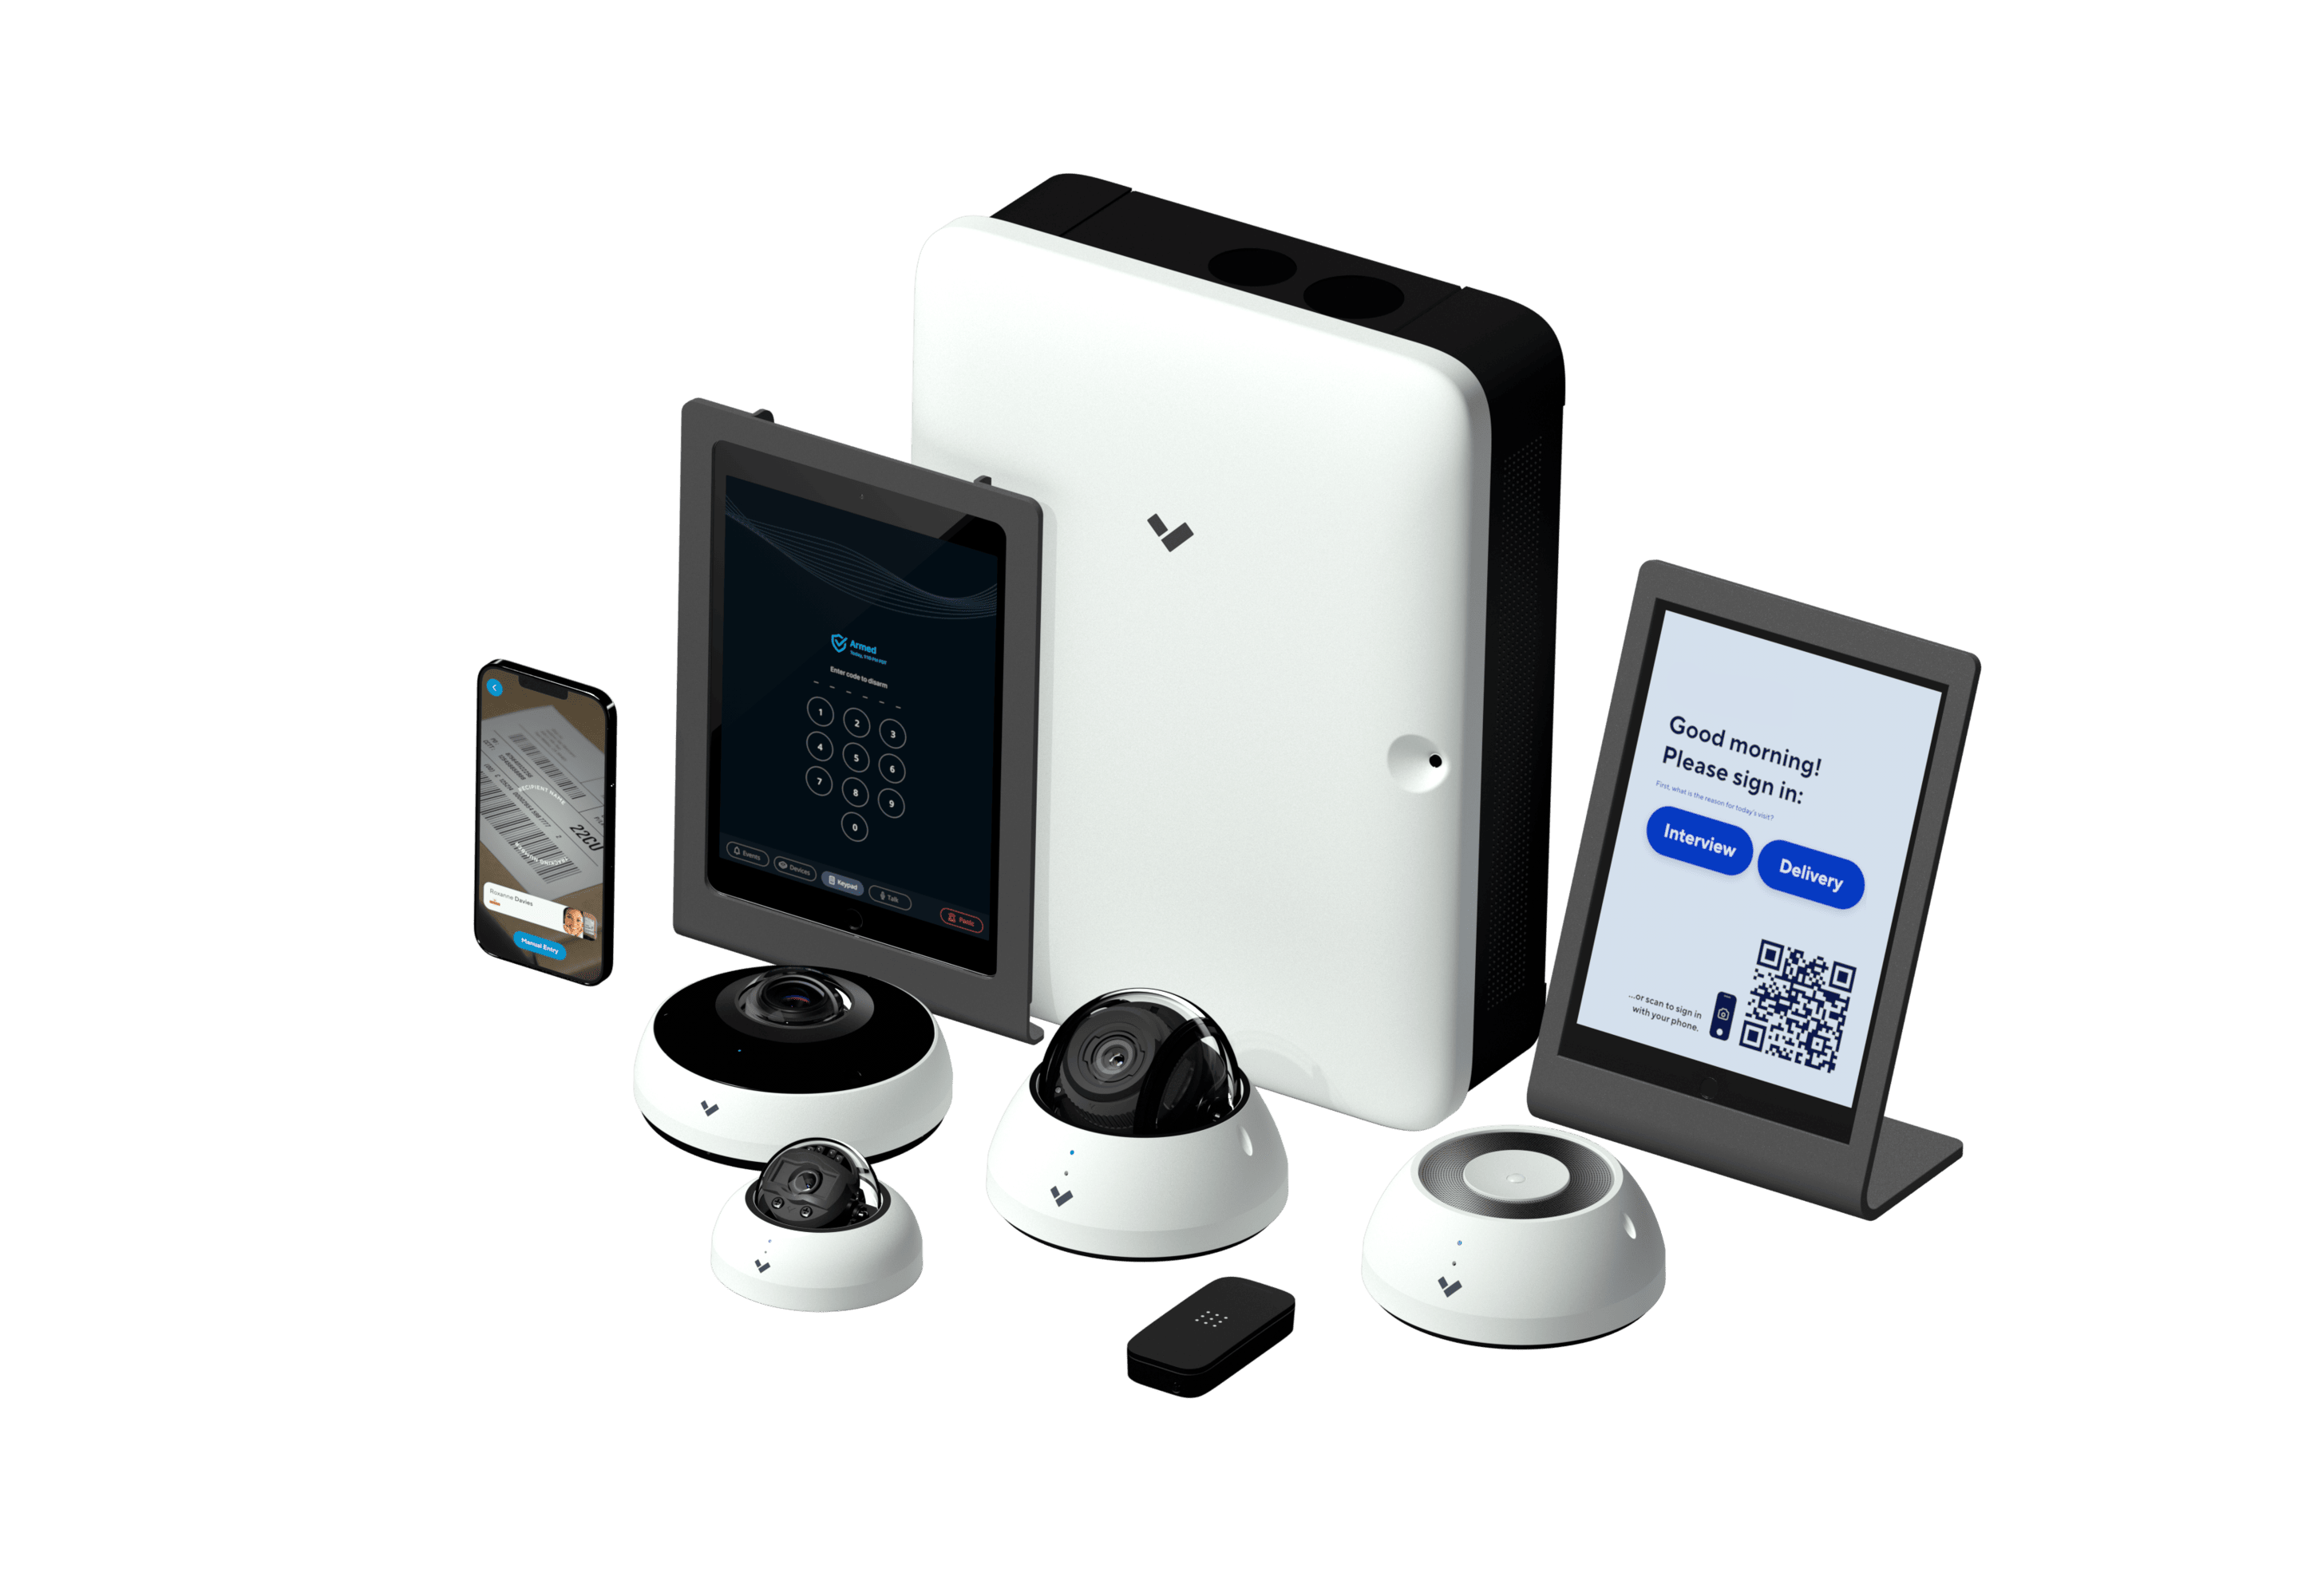 Verkada Device Family used for business security systems in Louisville